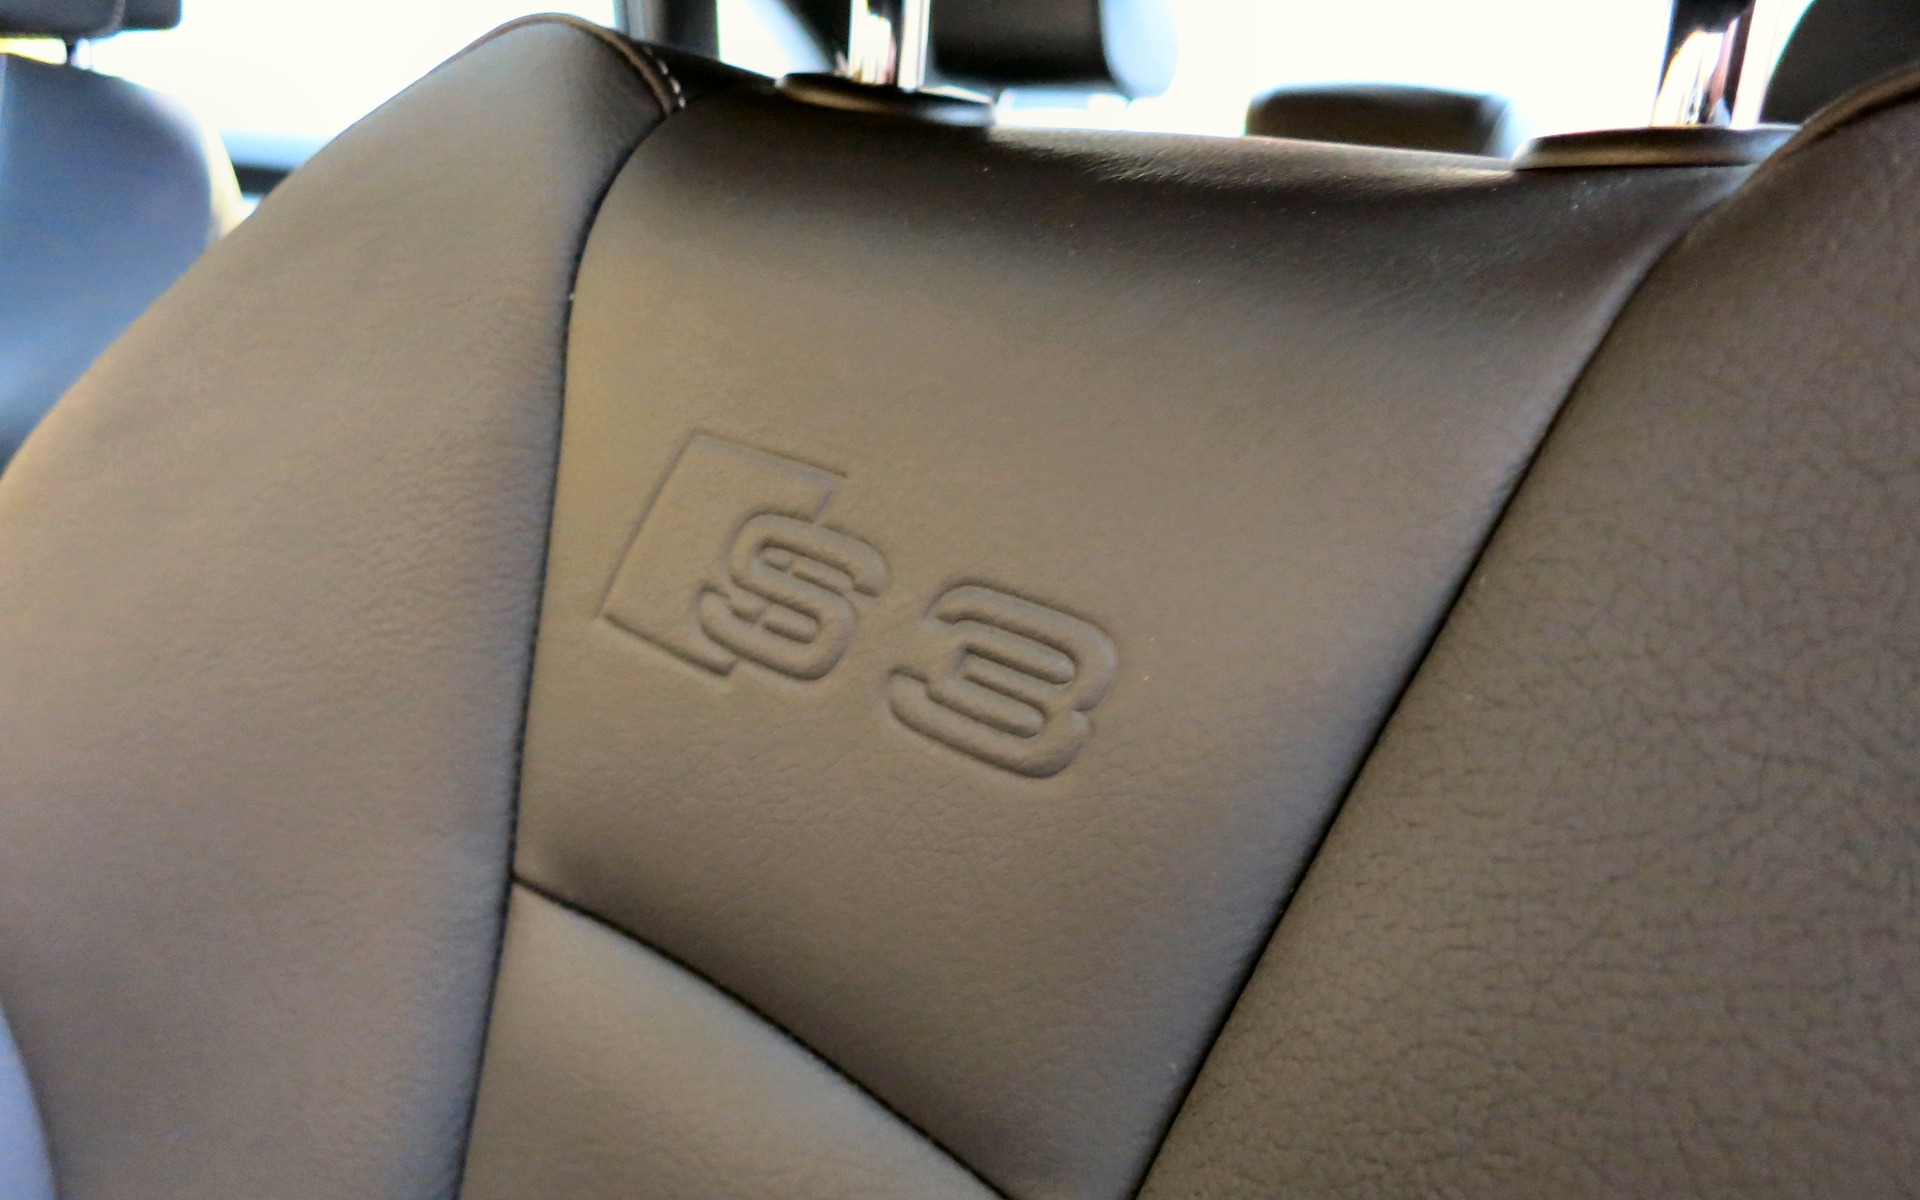 The vehicle’s leather sport seats were right-sized and supportive.